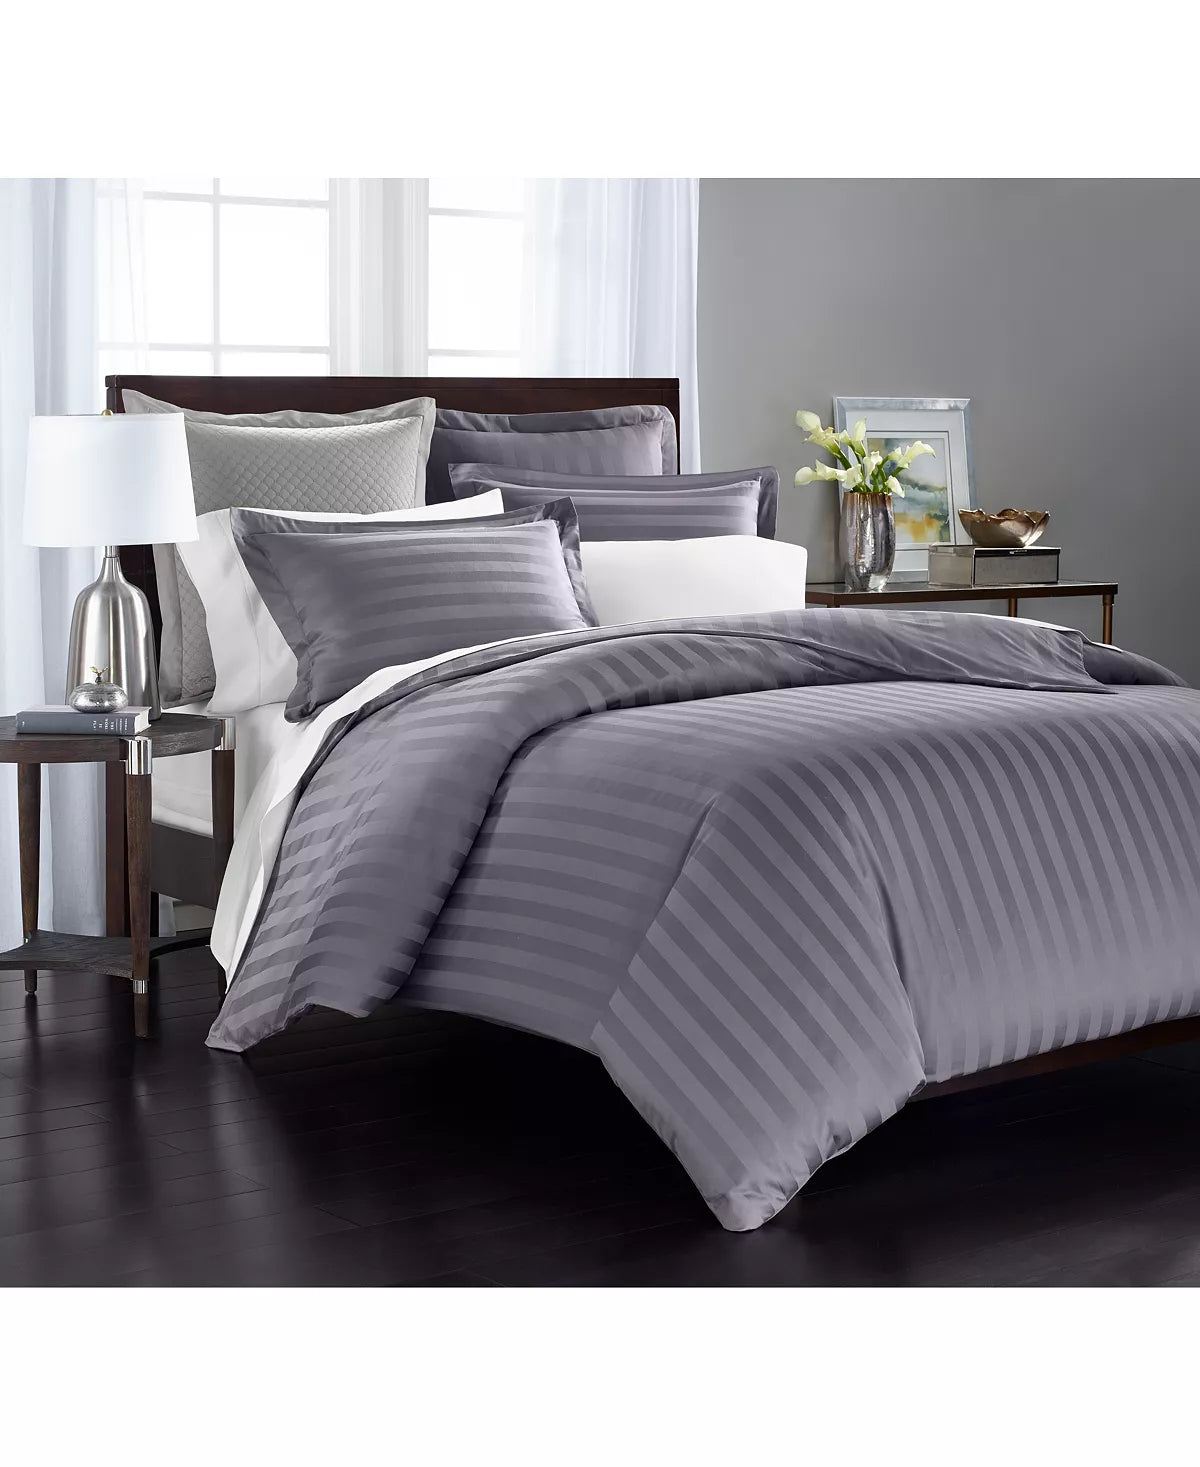 Charter Club Damask Collection Thin Stripe Supima Cotton 550 Thread Count 3 Pc. Comforter Set, Full/Queen